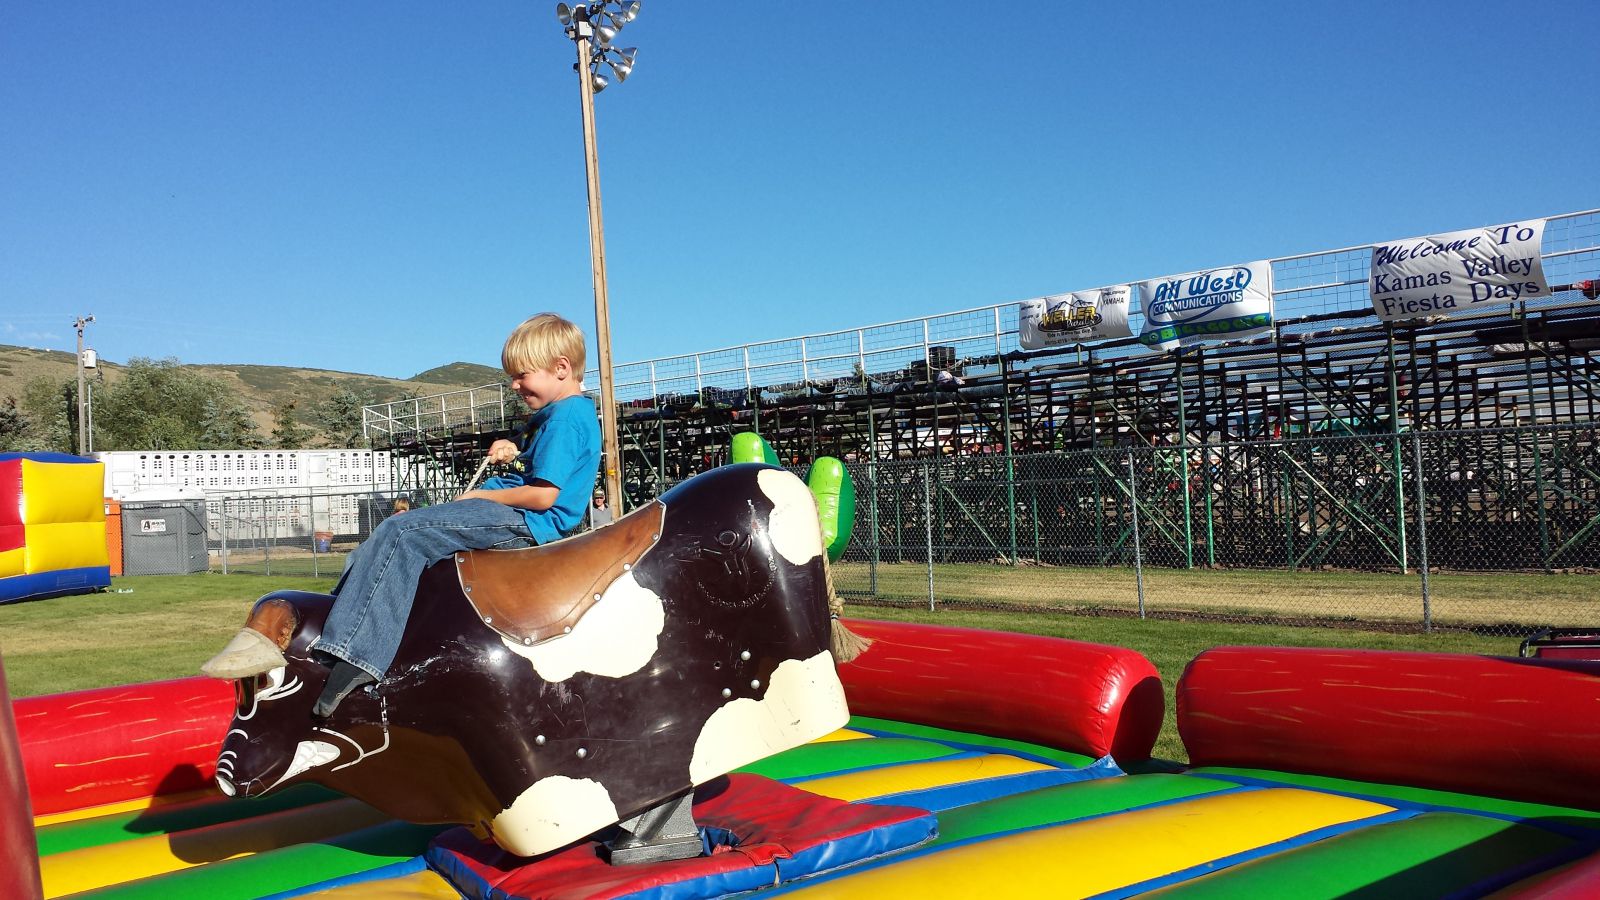 Grandson Reed trying his hand on the bucking bull machine